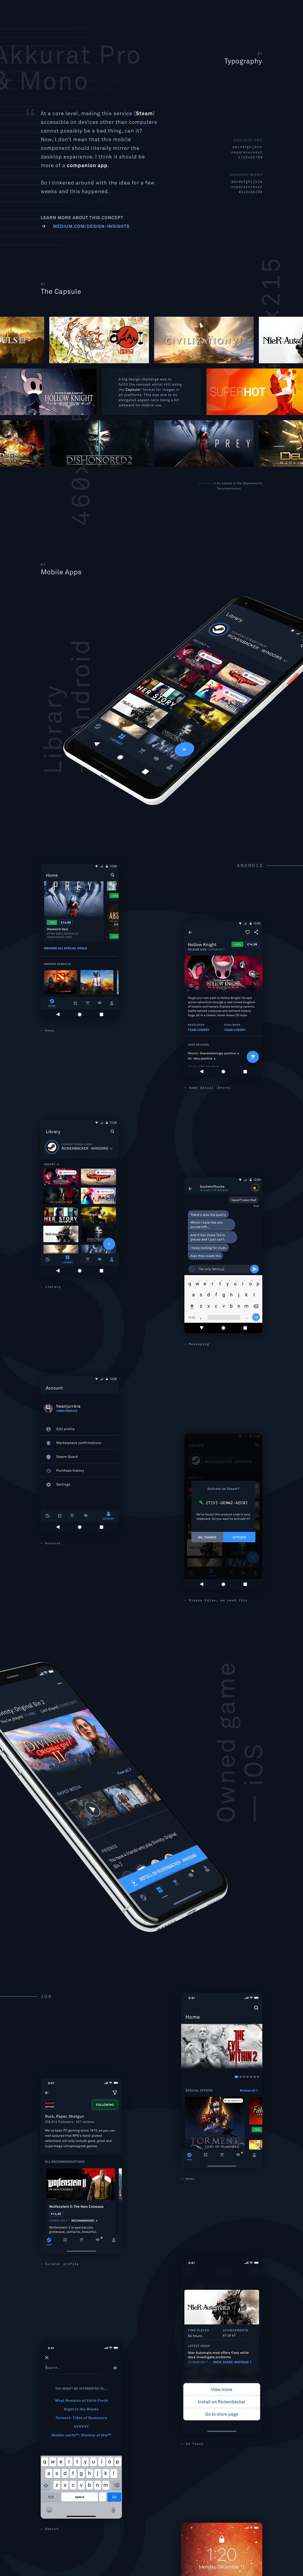 UI ux Videogames Steam Gaming blue android ios tv